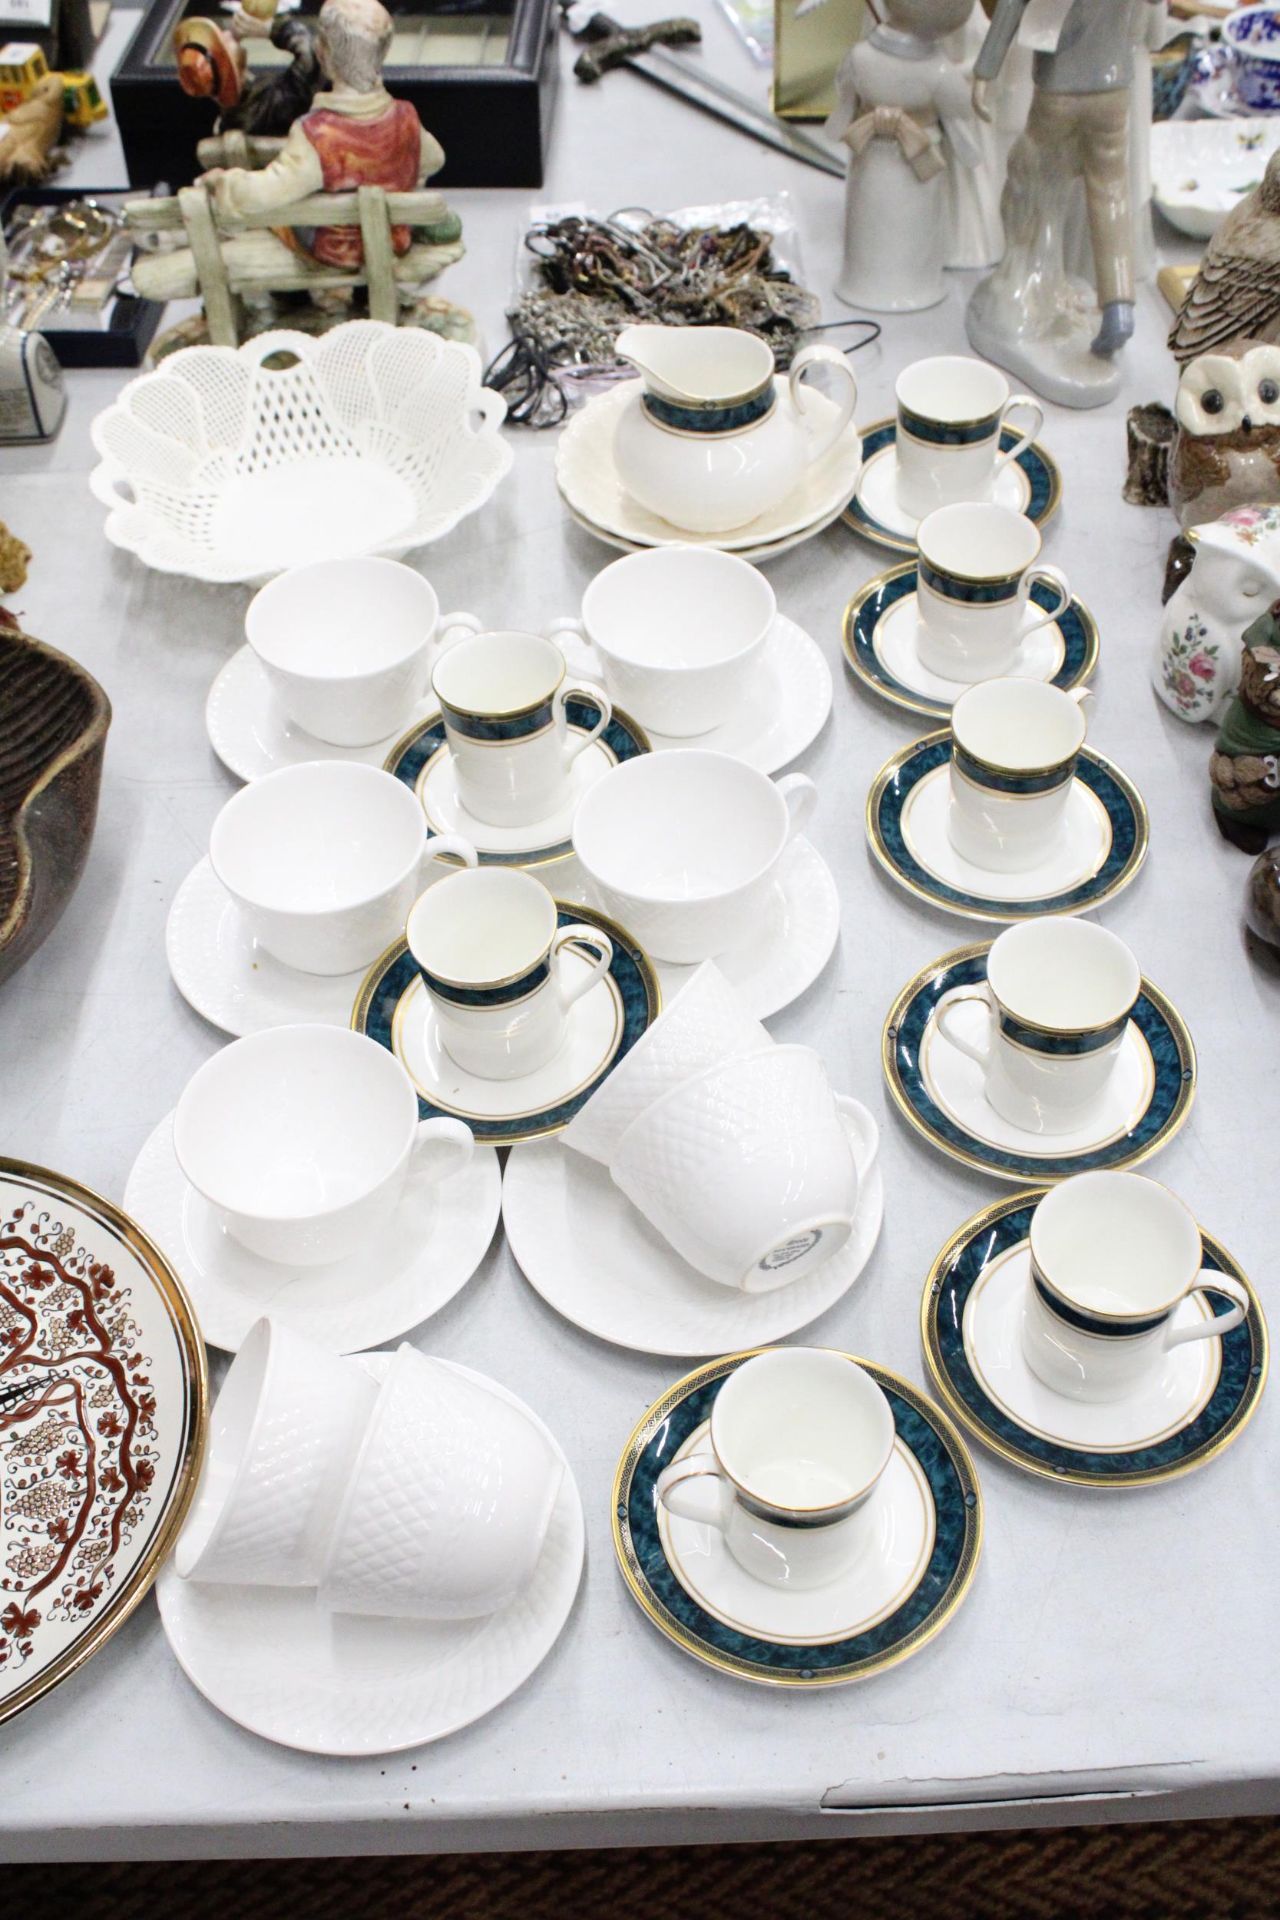 A MIXED LOT OF CUPS AND SAUCERS, JUG AND BOWLS TO INCLUDE ROYAL DOULTON "BILTMORE" AND SPODE WARE